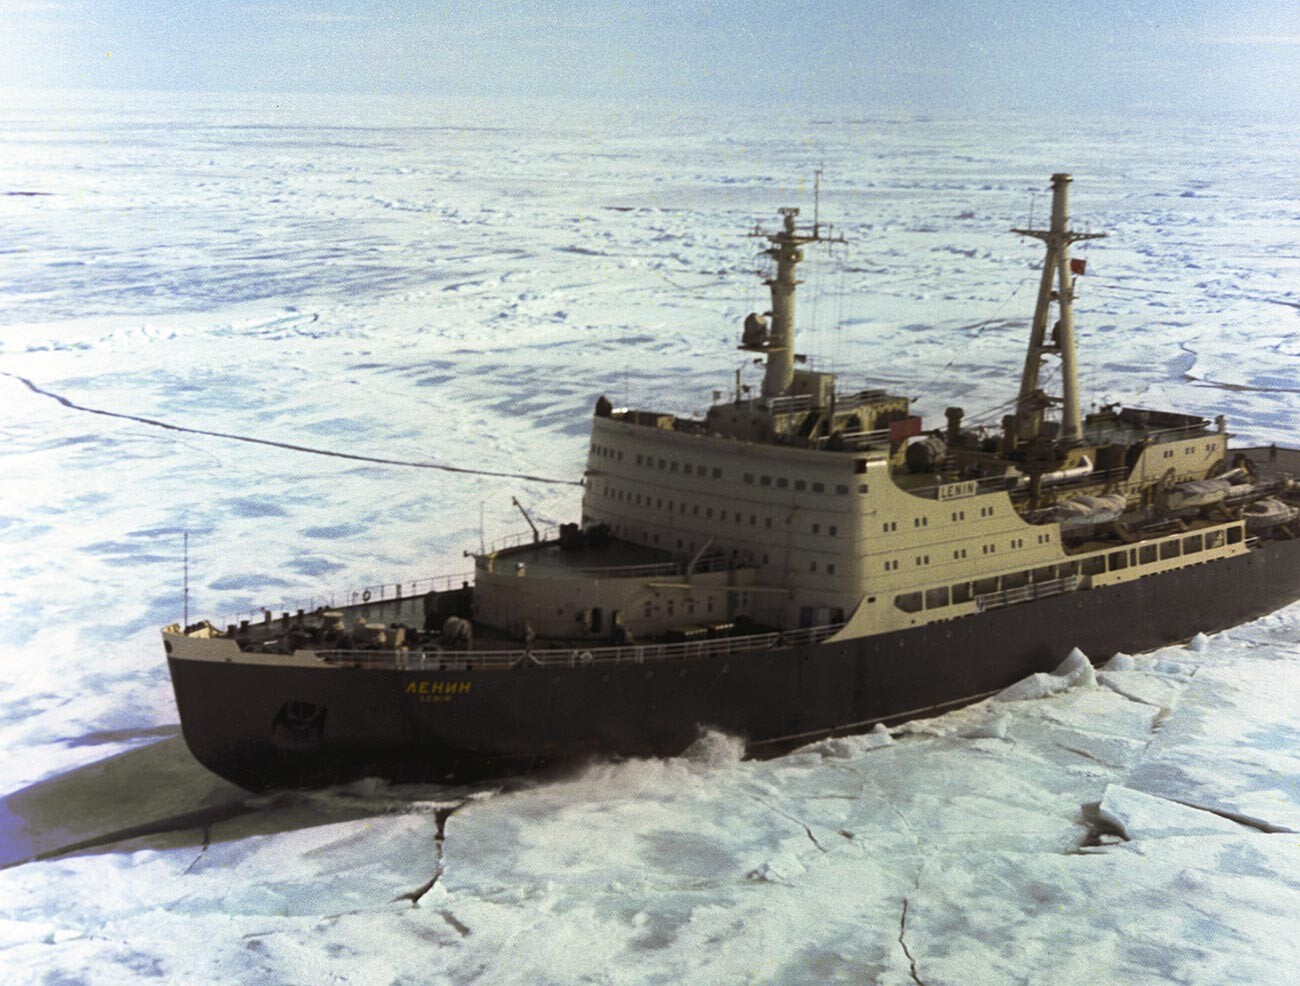 A nuclear-powered icebreaker Lenin moving through the ice